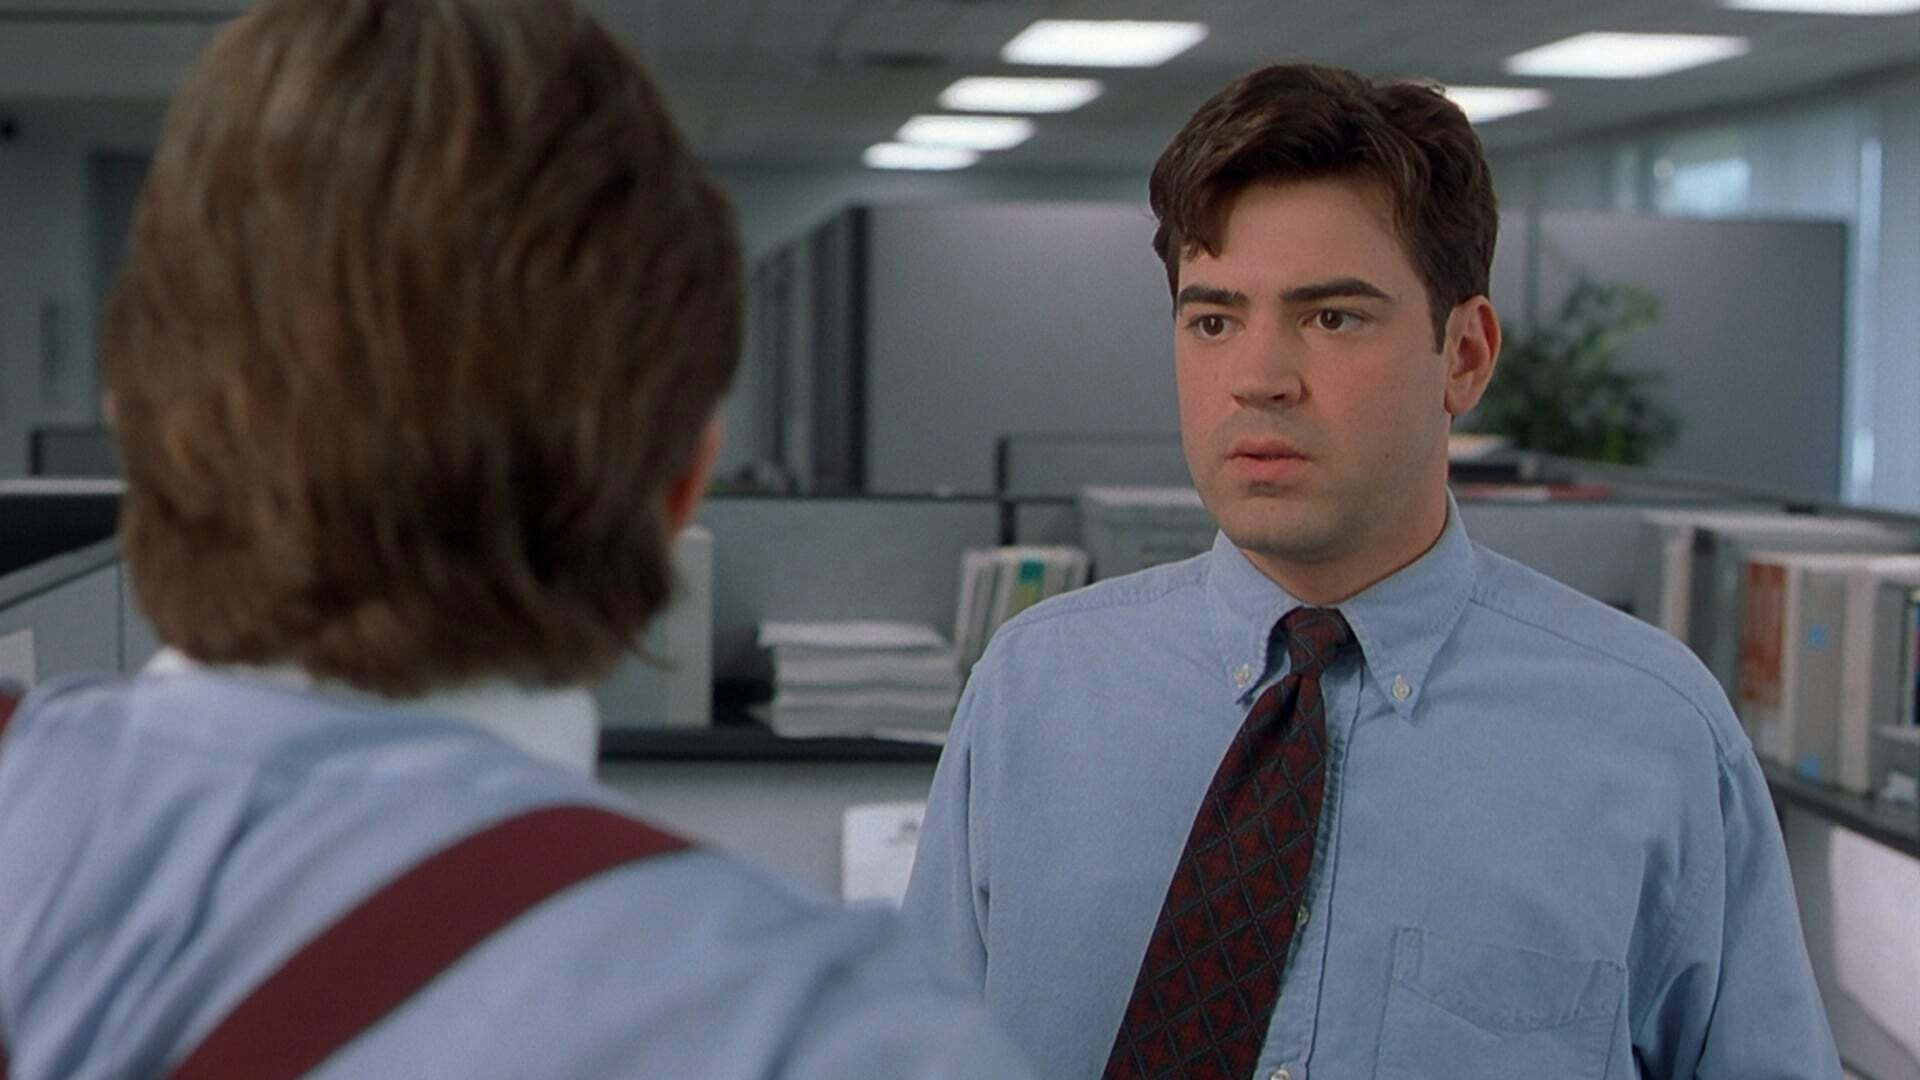 office space wallpaper 1920